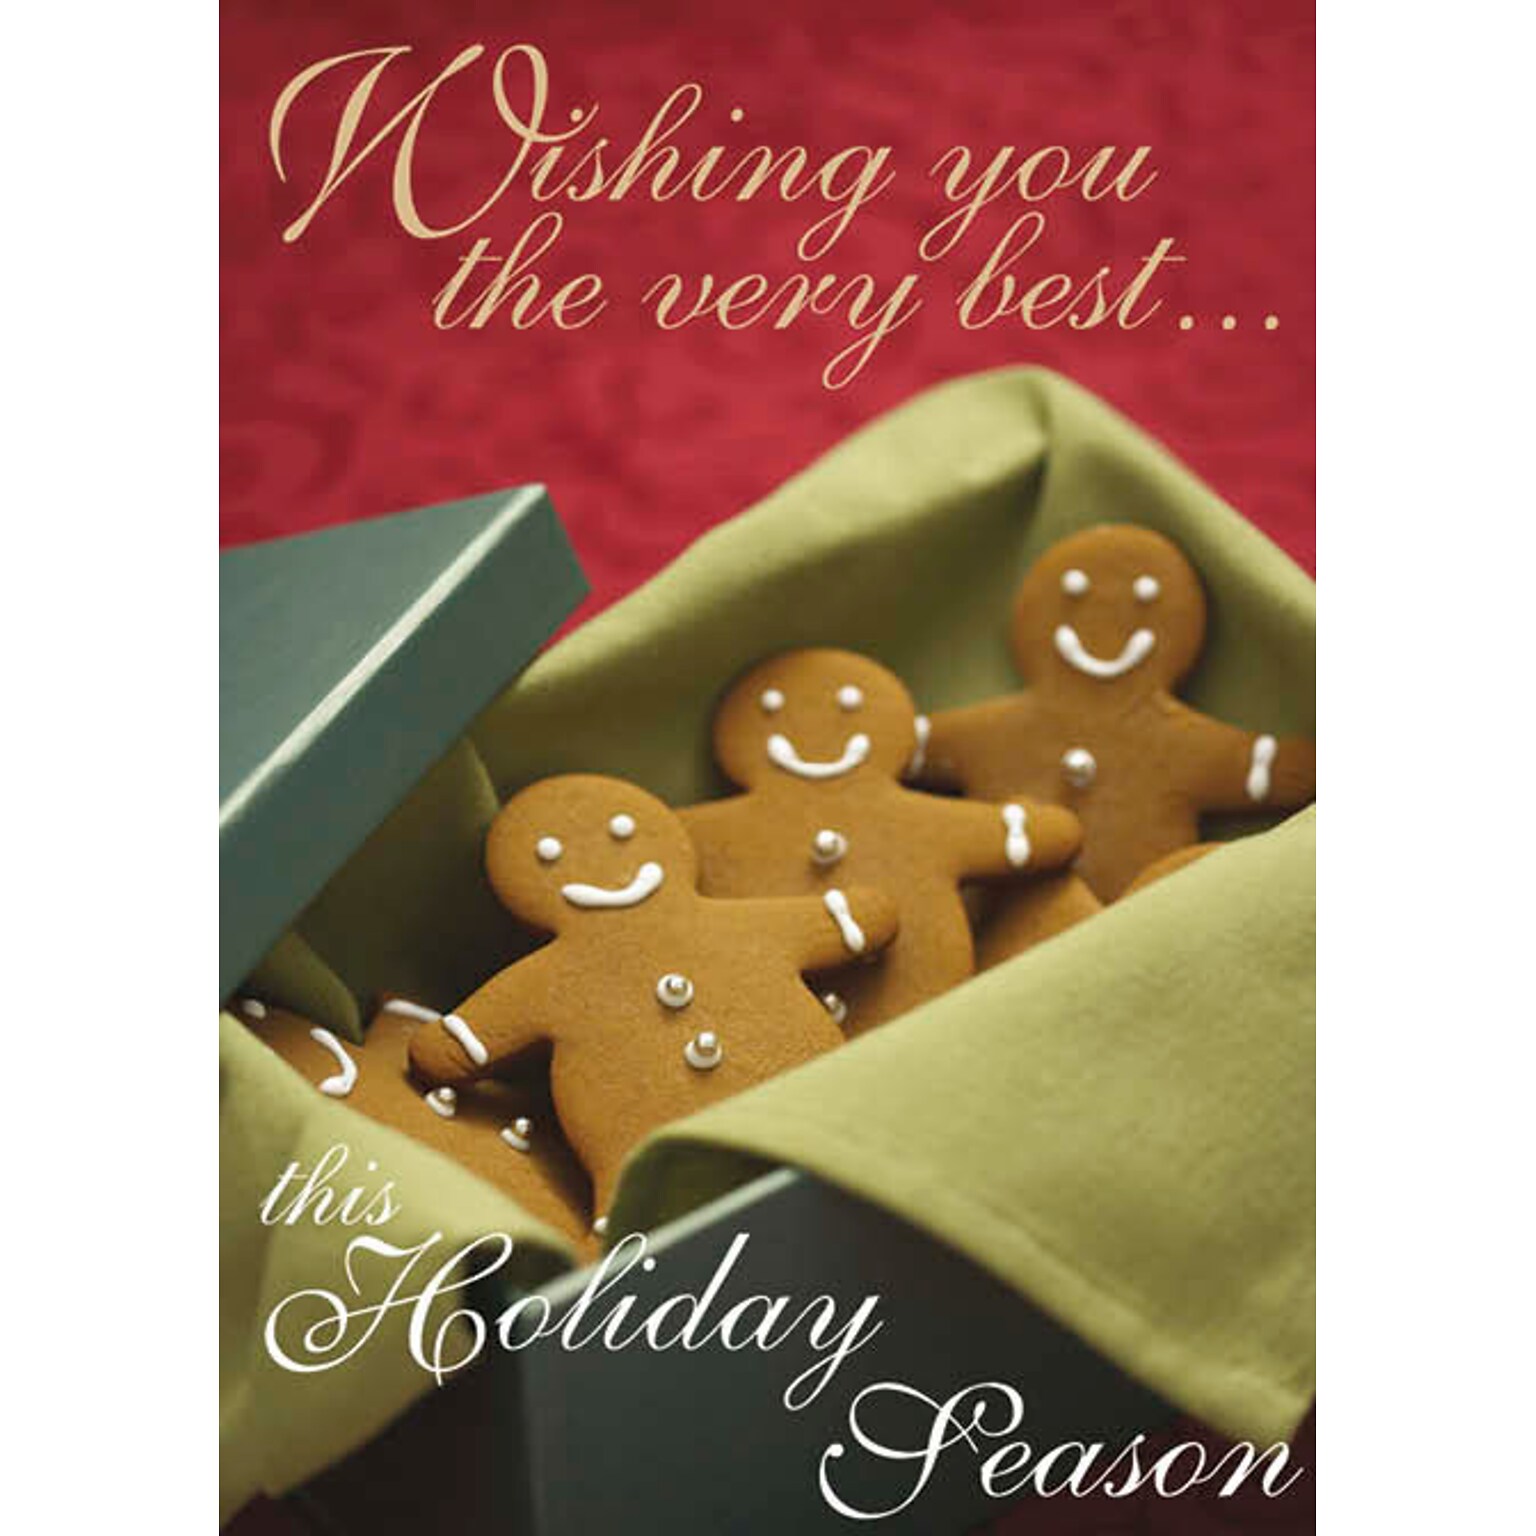 Wishing You The Very Best This Season Holiday Greeting Cards, With A7 Envelopes, 7 x 5, 25 Cards per Set